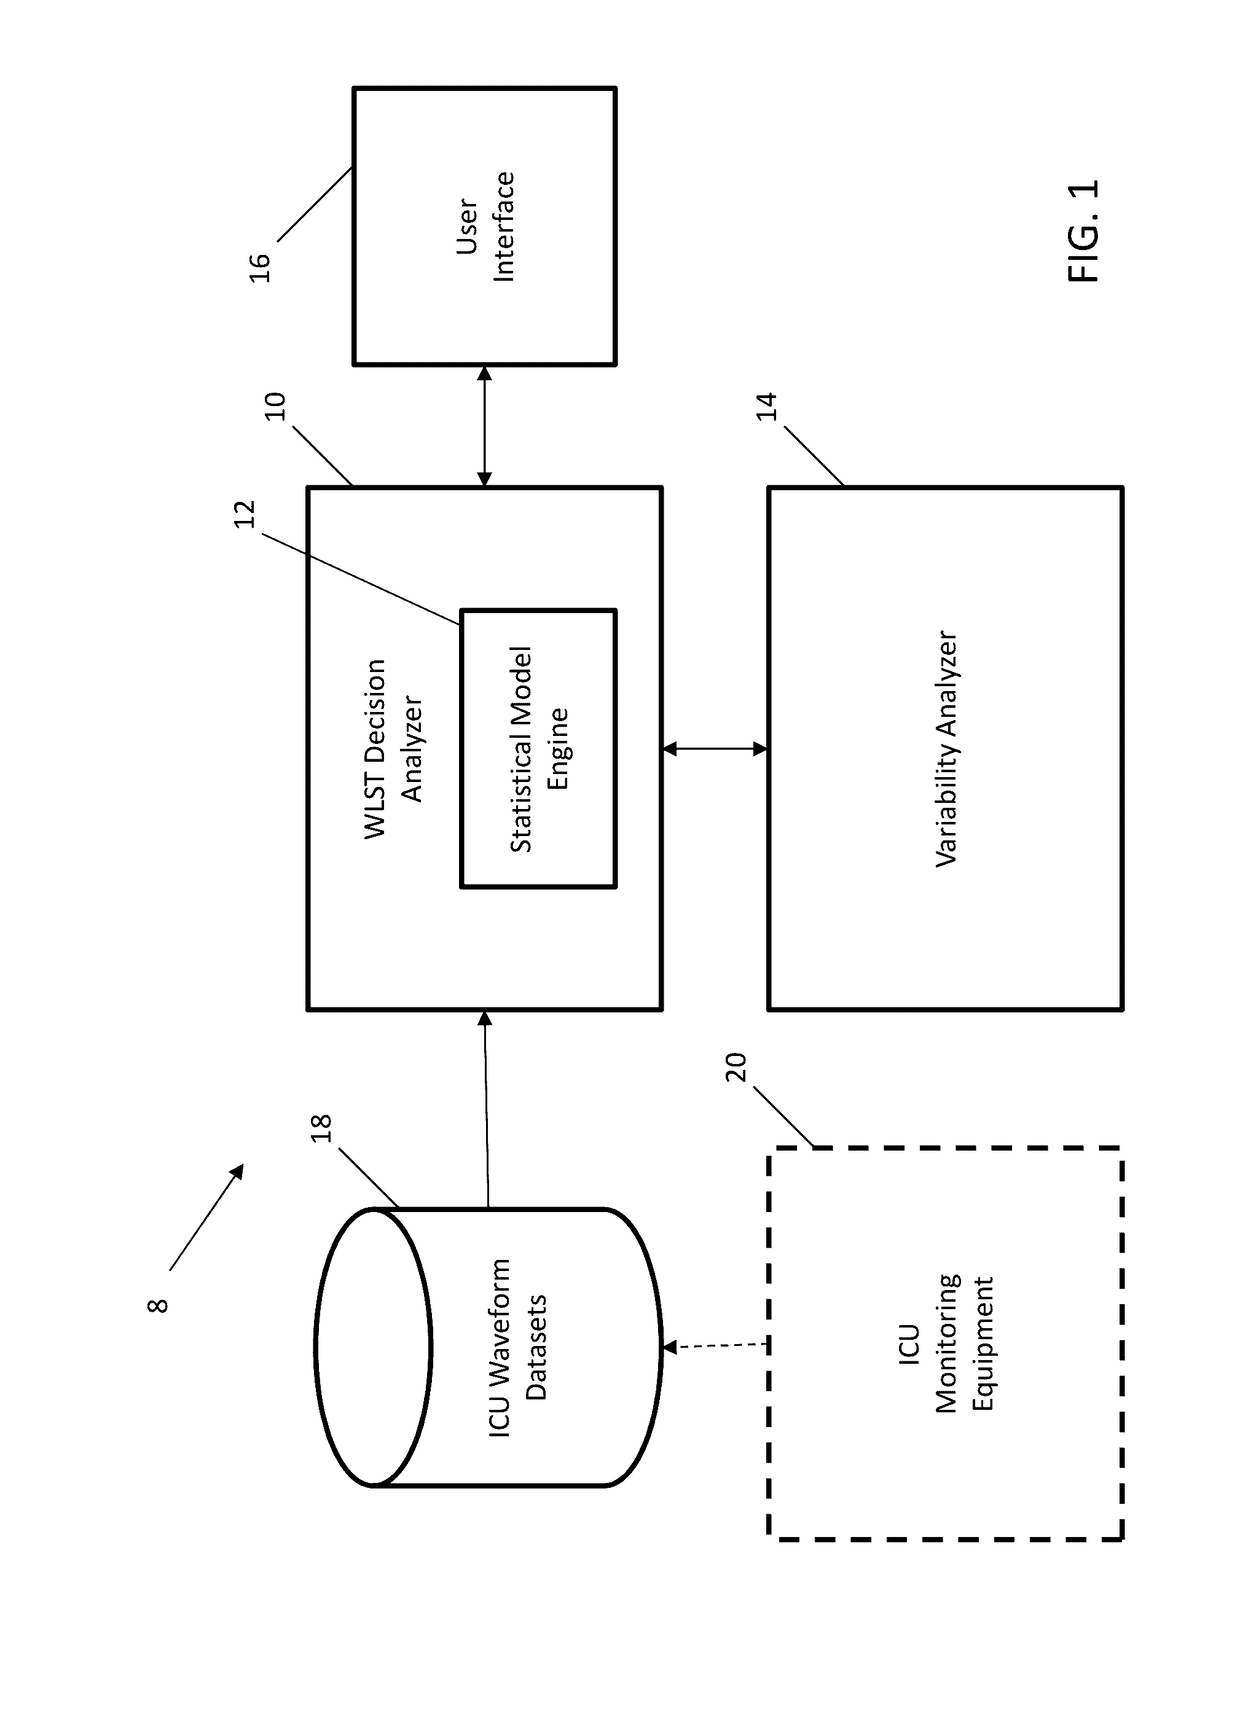 System and Method for Assisting Decisions Associated with Events Relative to Withdrawal of Life-Sustaining Therapy Using Variability Measurements